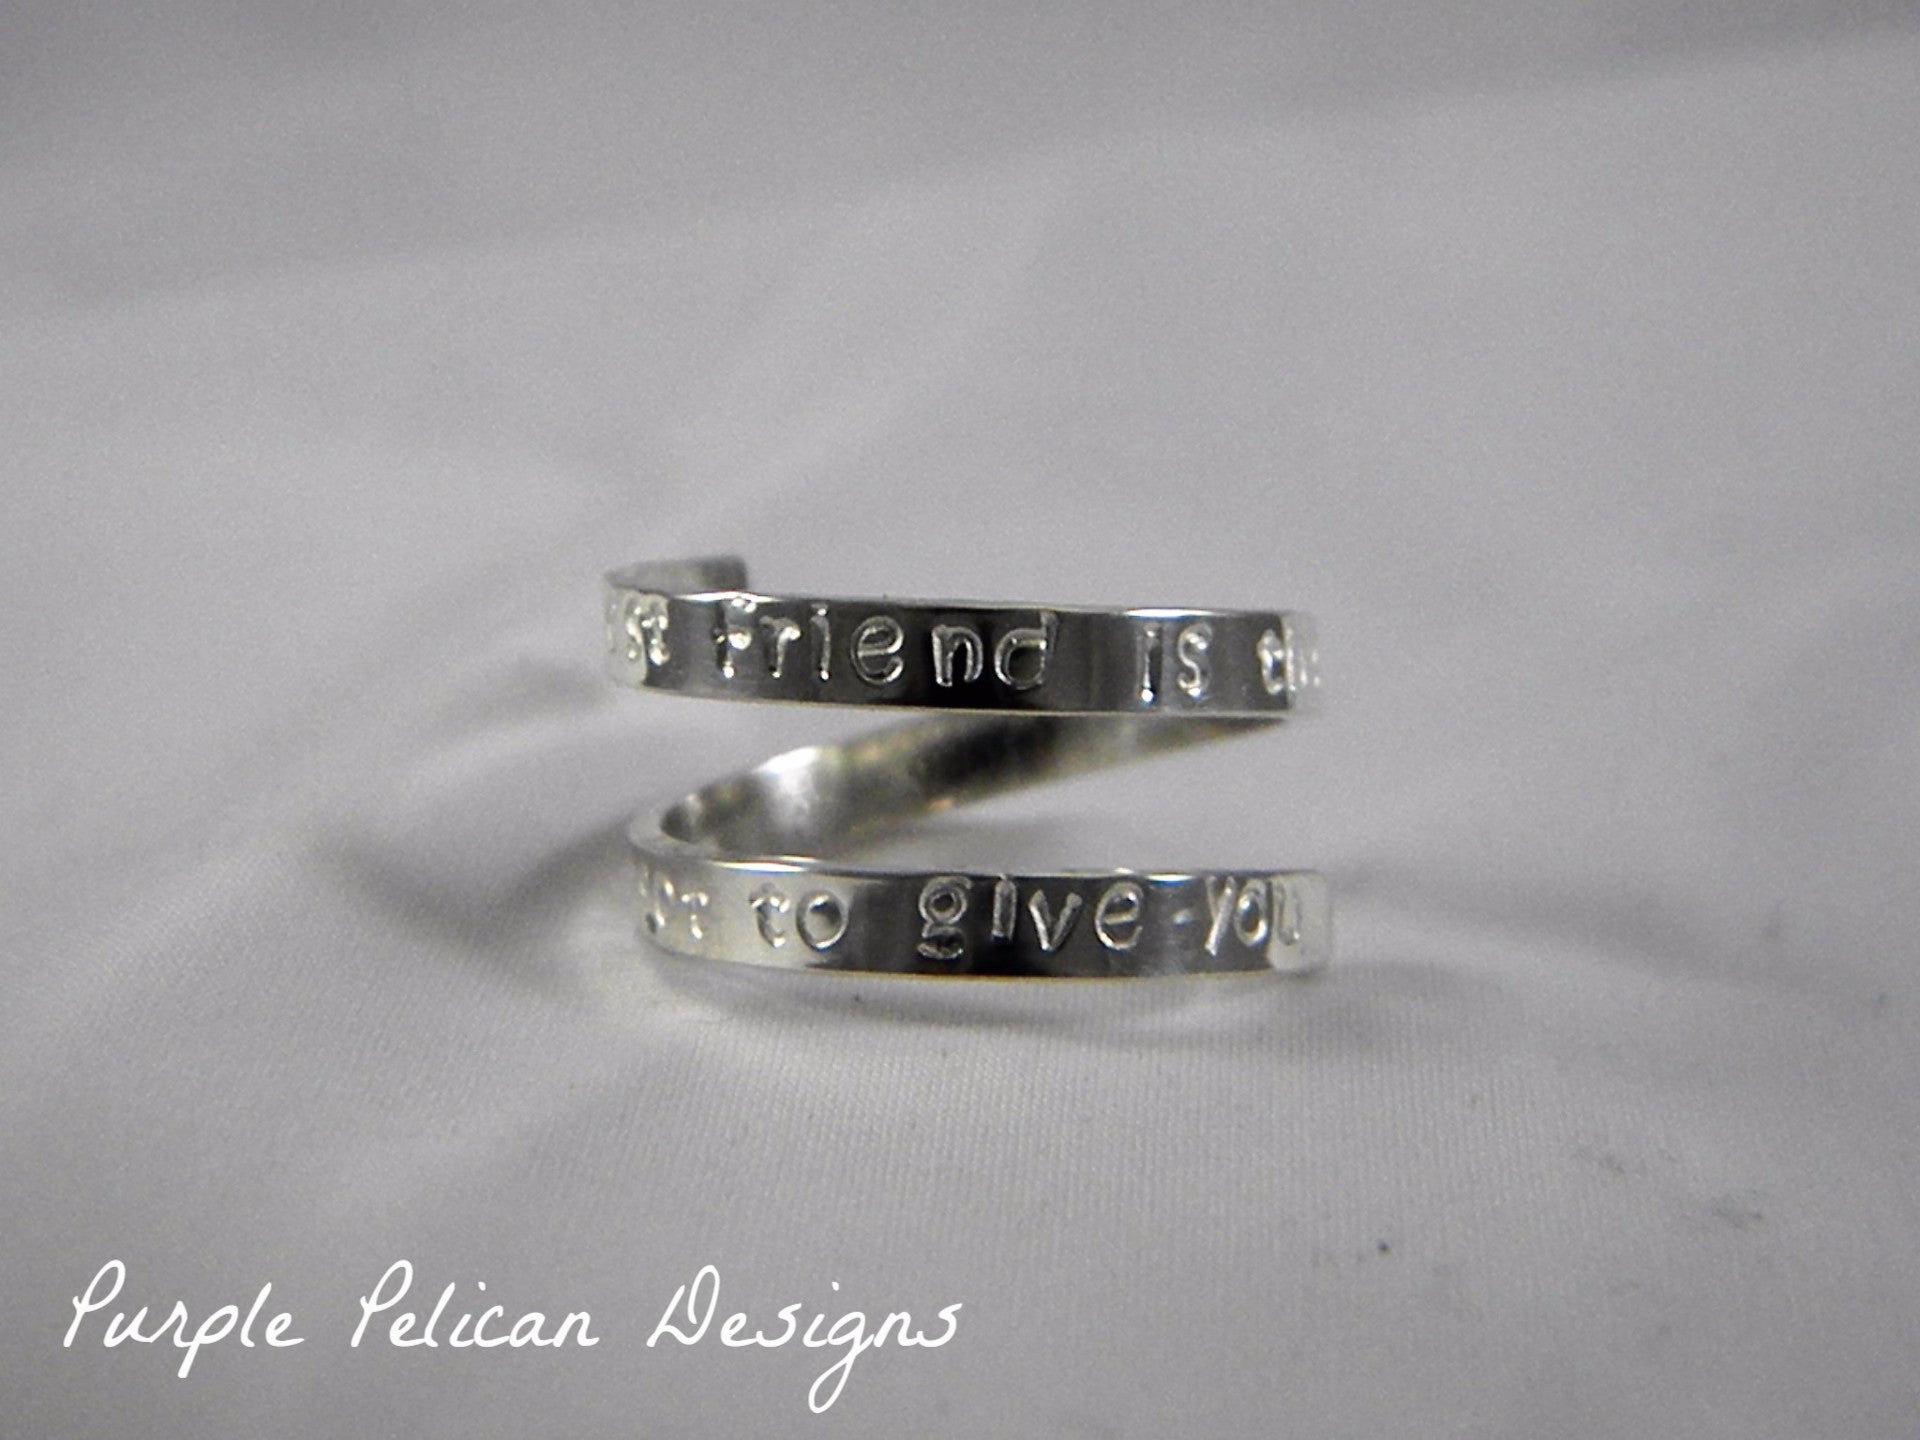 Double State Ring,country Rings Silver,silver Any States Ring,personalized  2 States Ring,best Friend Ring,friendship Ring,long Distance Ring - Etsy | Friend  rings, Country rings, Friendship rings